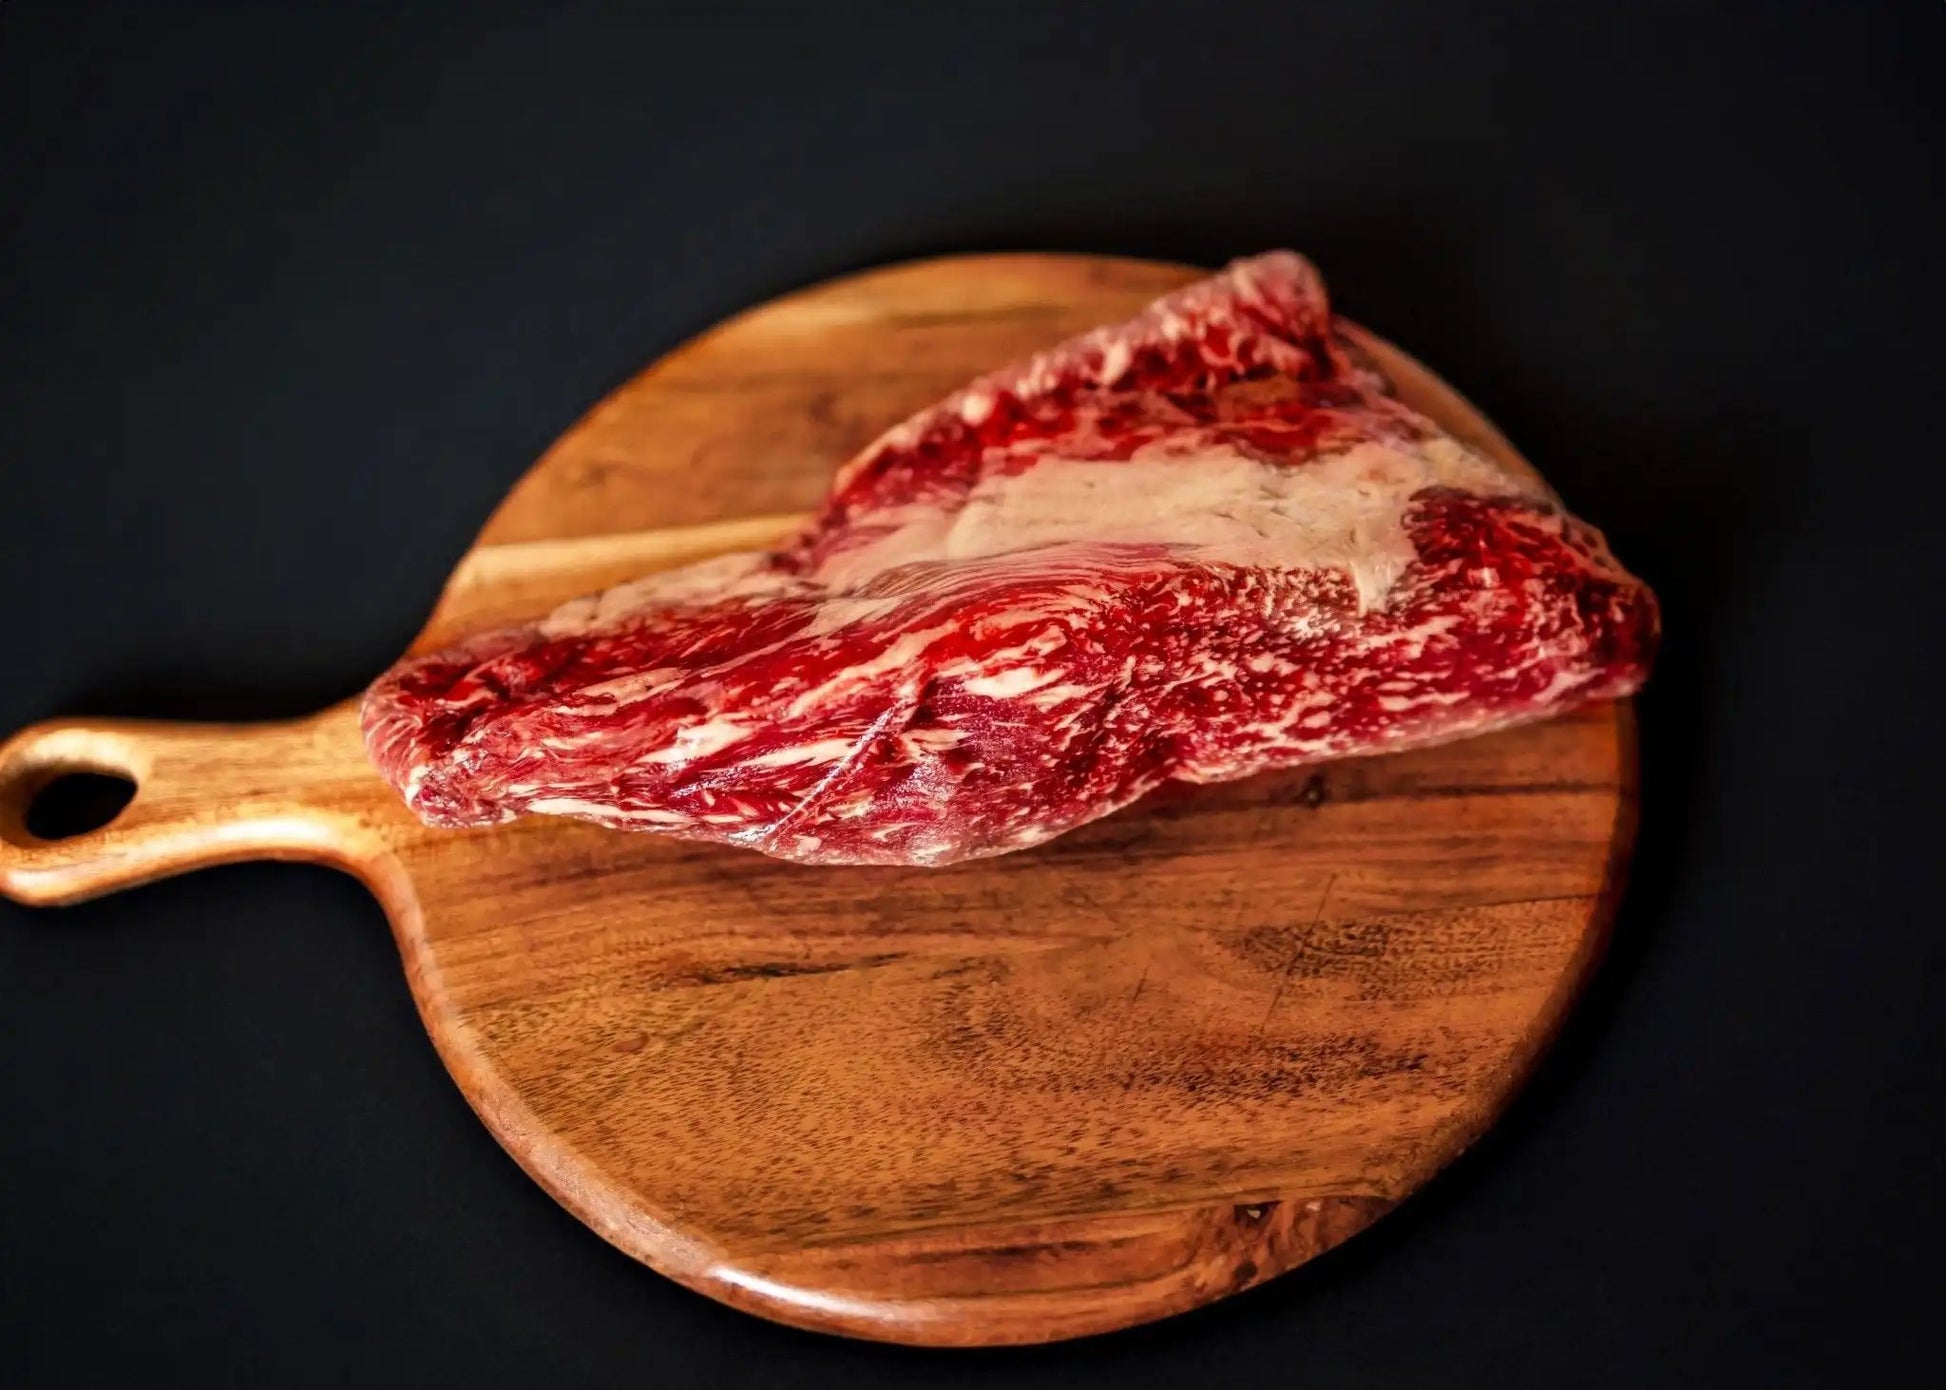 100% All-Natural Grass-Fed Pasture-Raised Wagyu Tri-TipHufeisen Ranch's 100% All-Natural Grass-Fed Pasture-Raised Wagyu Tri-Tip is the ultimate indulgence for any beef enthusiast. Sourced from below the sirloin, this thi100%The Hufeisen-Ranch (WYO Wagyu)